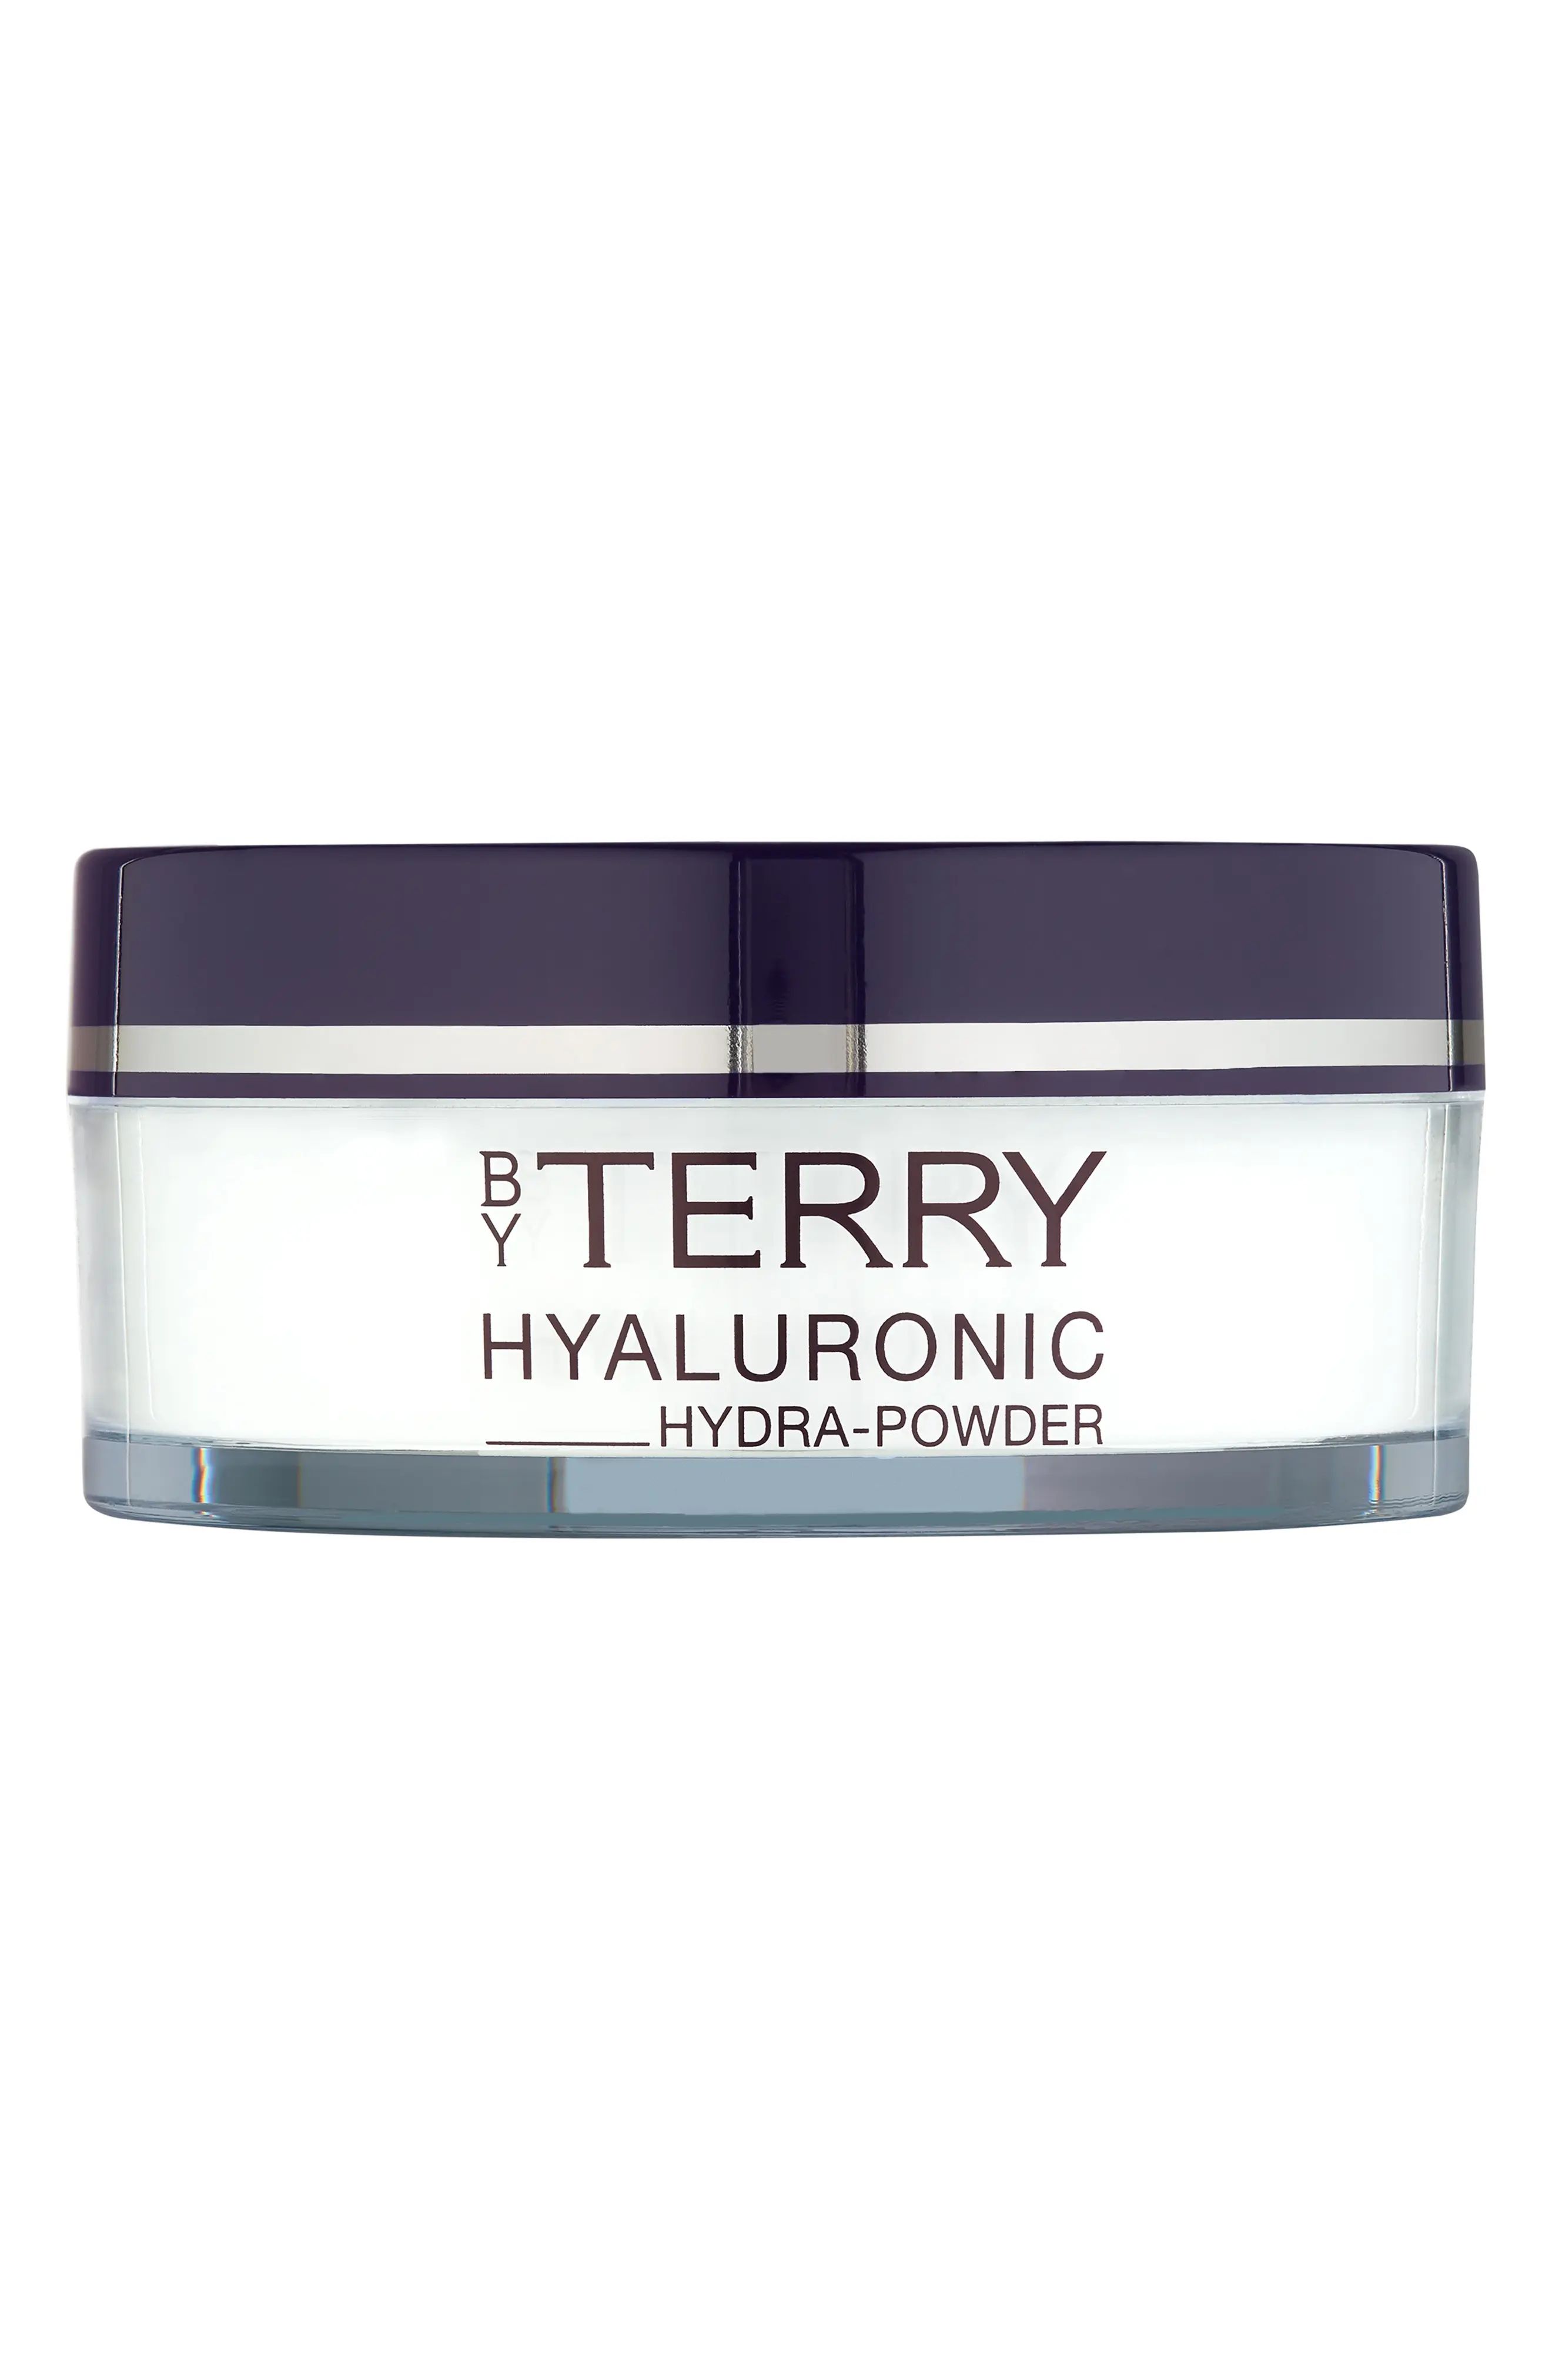 By Terry Hyaluronic Hydra-Powder at Nordstrom | Nordstrom